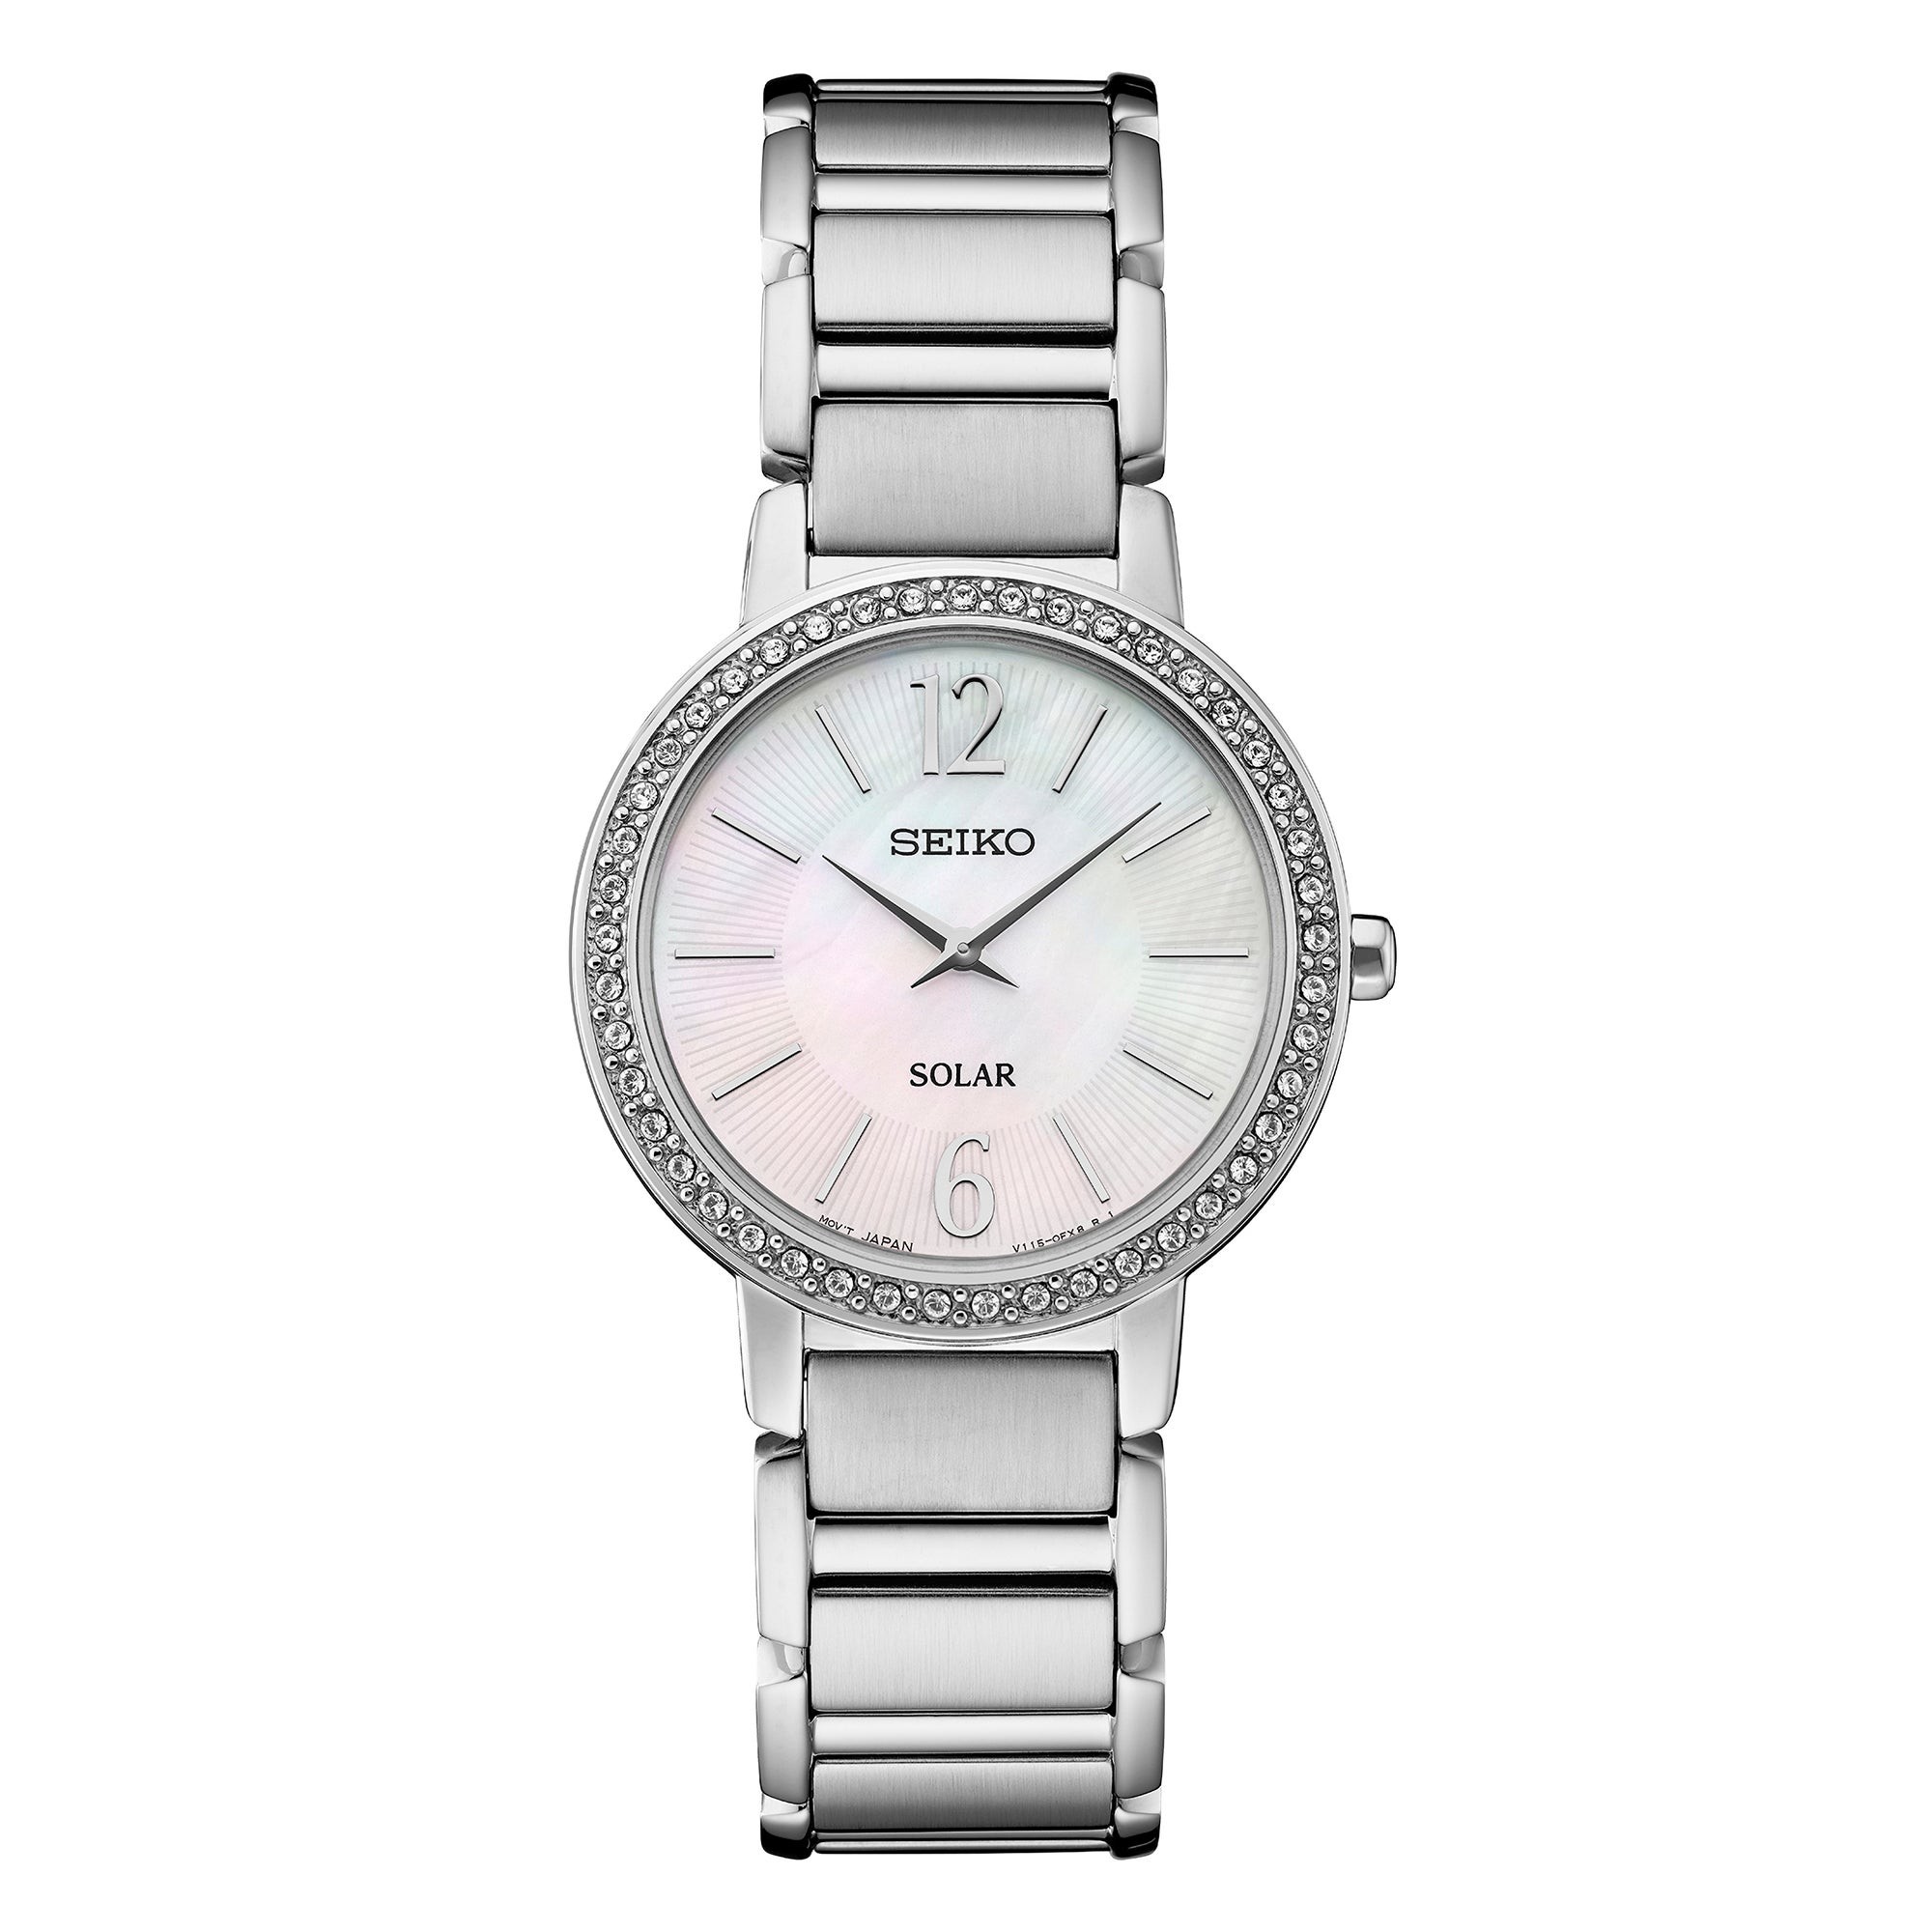 Ladies' Crystal Silver-Tone Stainless Steel Watch, Mother-of-Pearl Dial